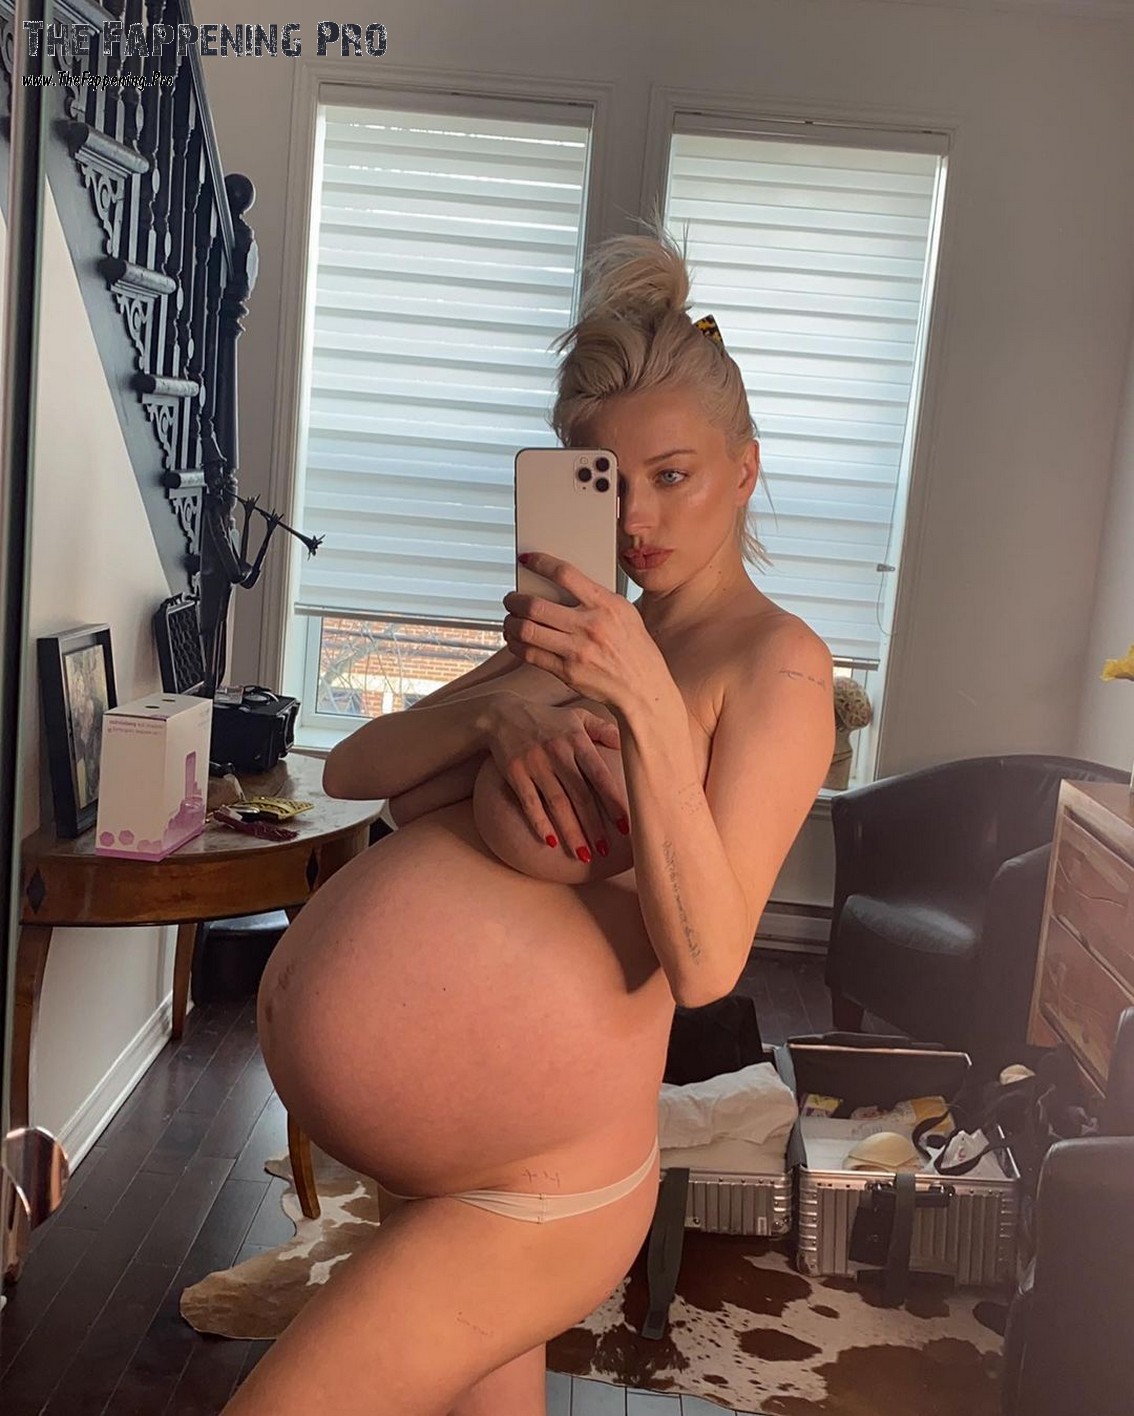 Celebrate International Mother’s Day with Caroline Vreeland as she shares a daring and intimate look at her recent pregnancy journey. The stunning nude photo showcases her beautiful baby bump, highlighting the miraculous changes her body went through just two months ago. Witness her post-pregnancy transformation and admire her timeless beauty on this special occasion.